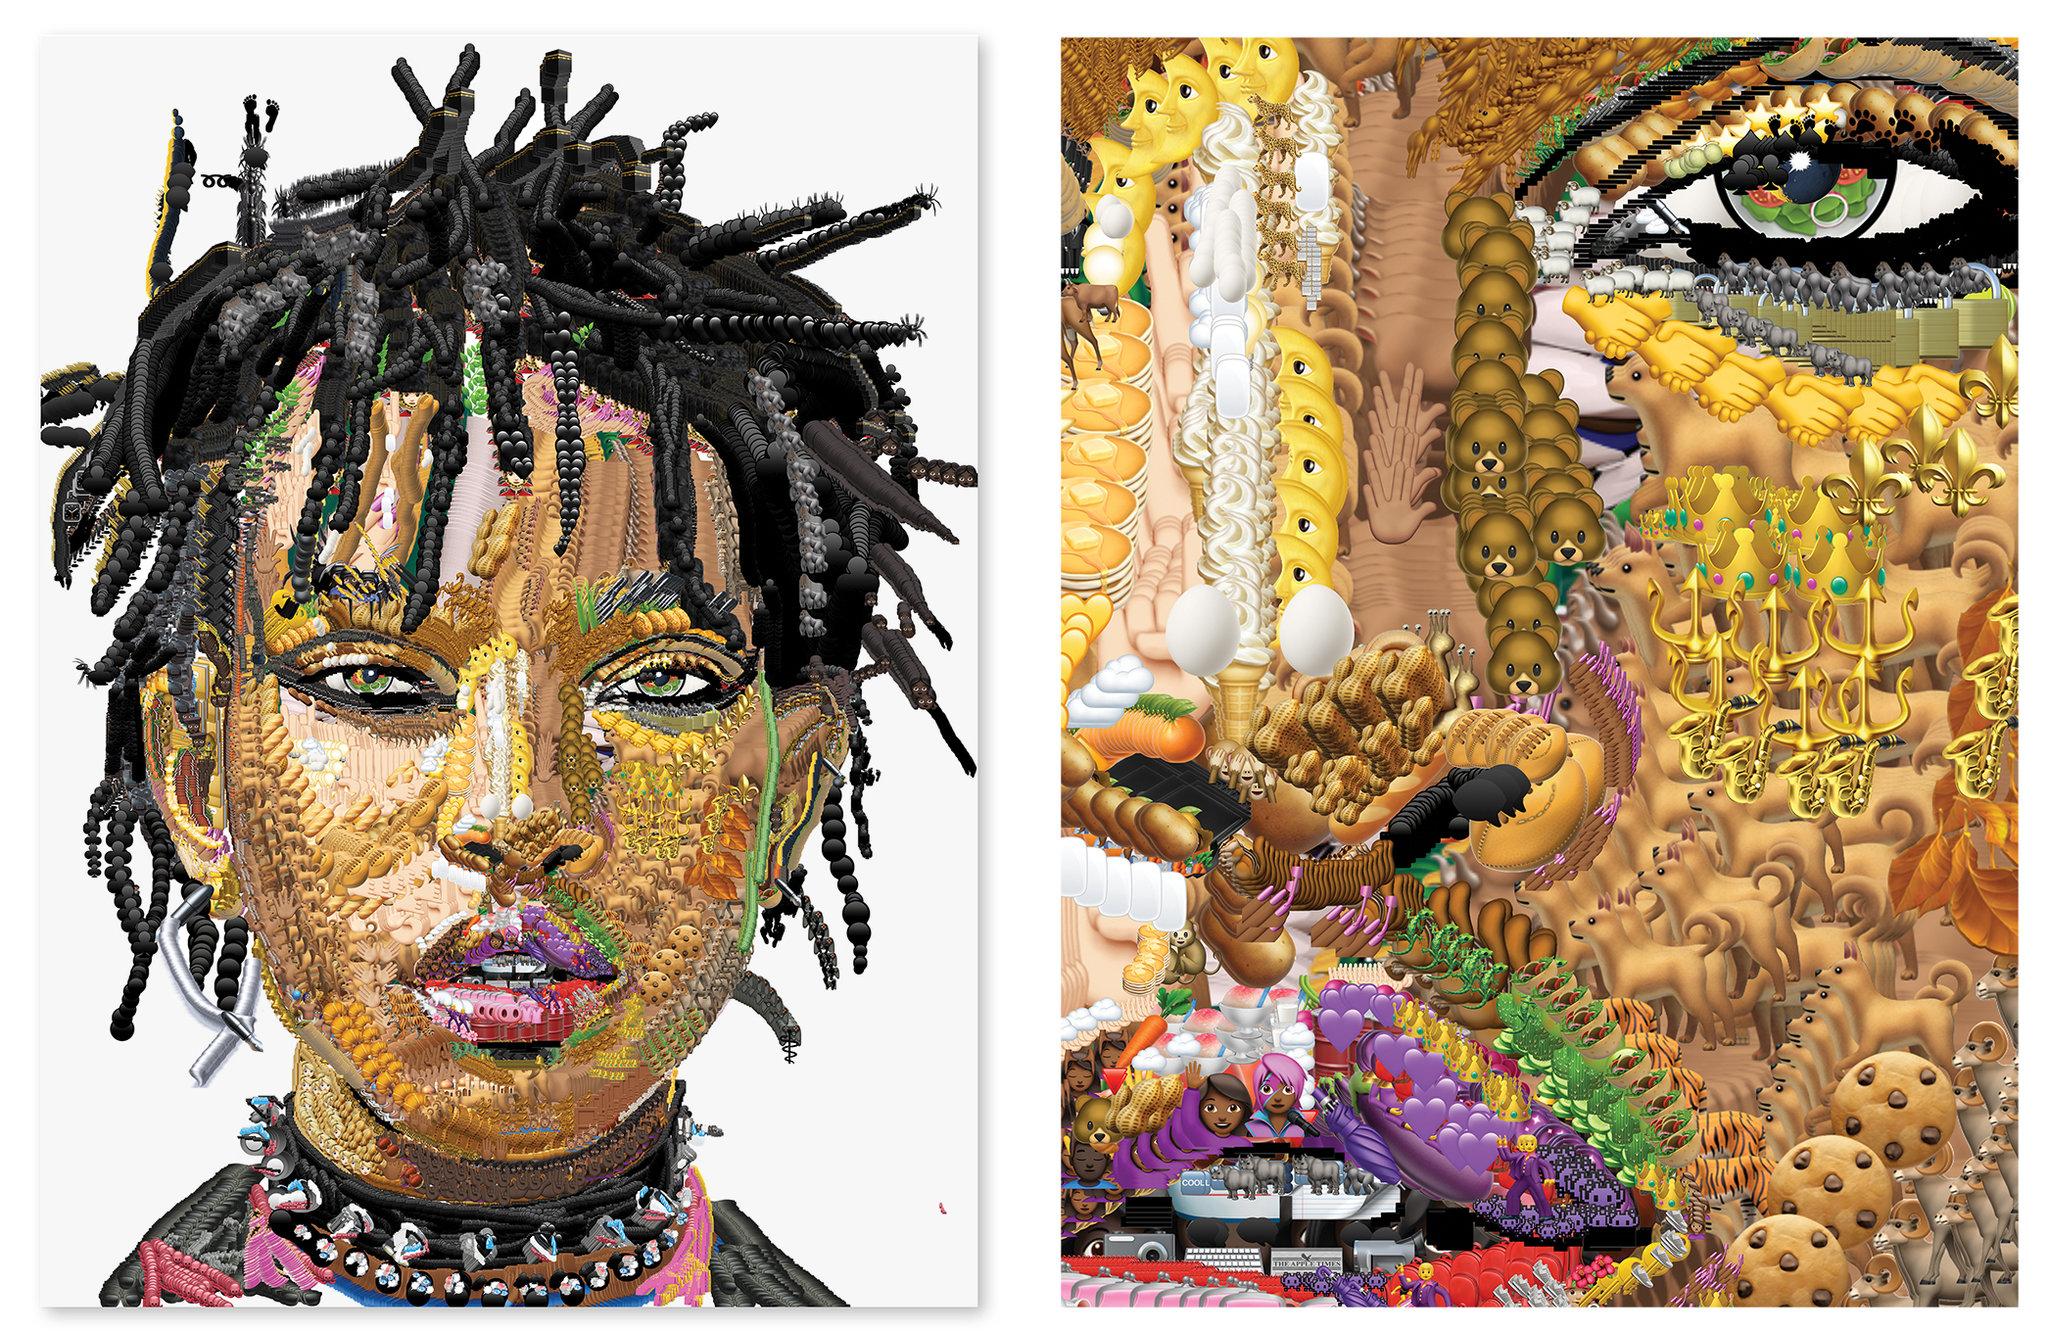 A portrait of Willow Smith by Yung Jake